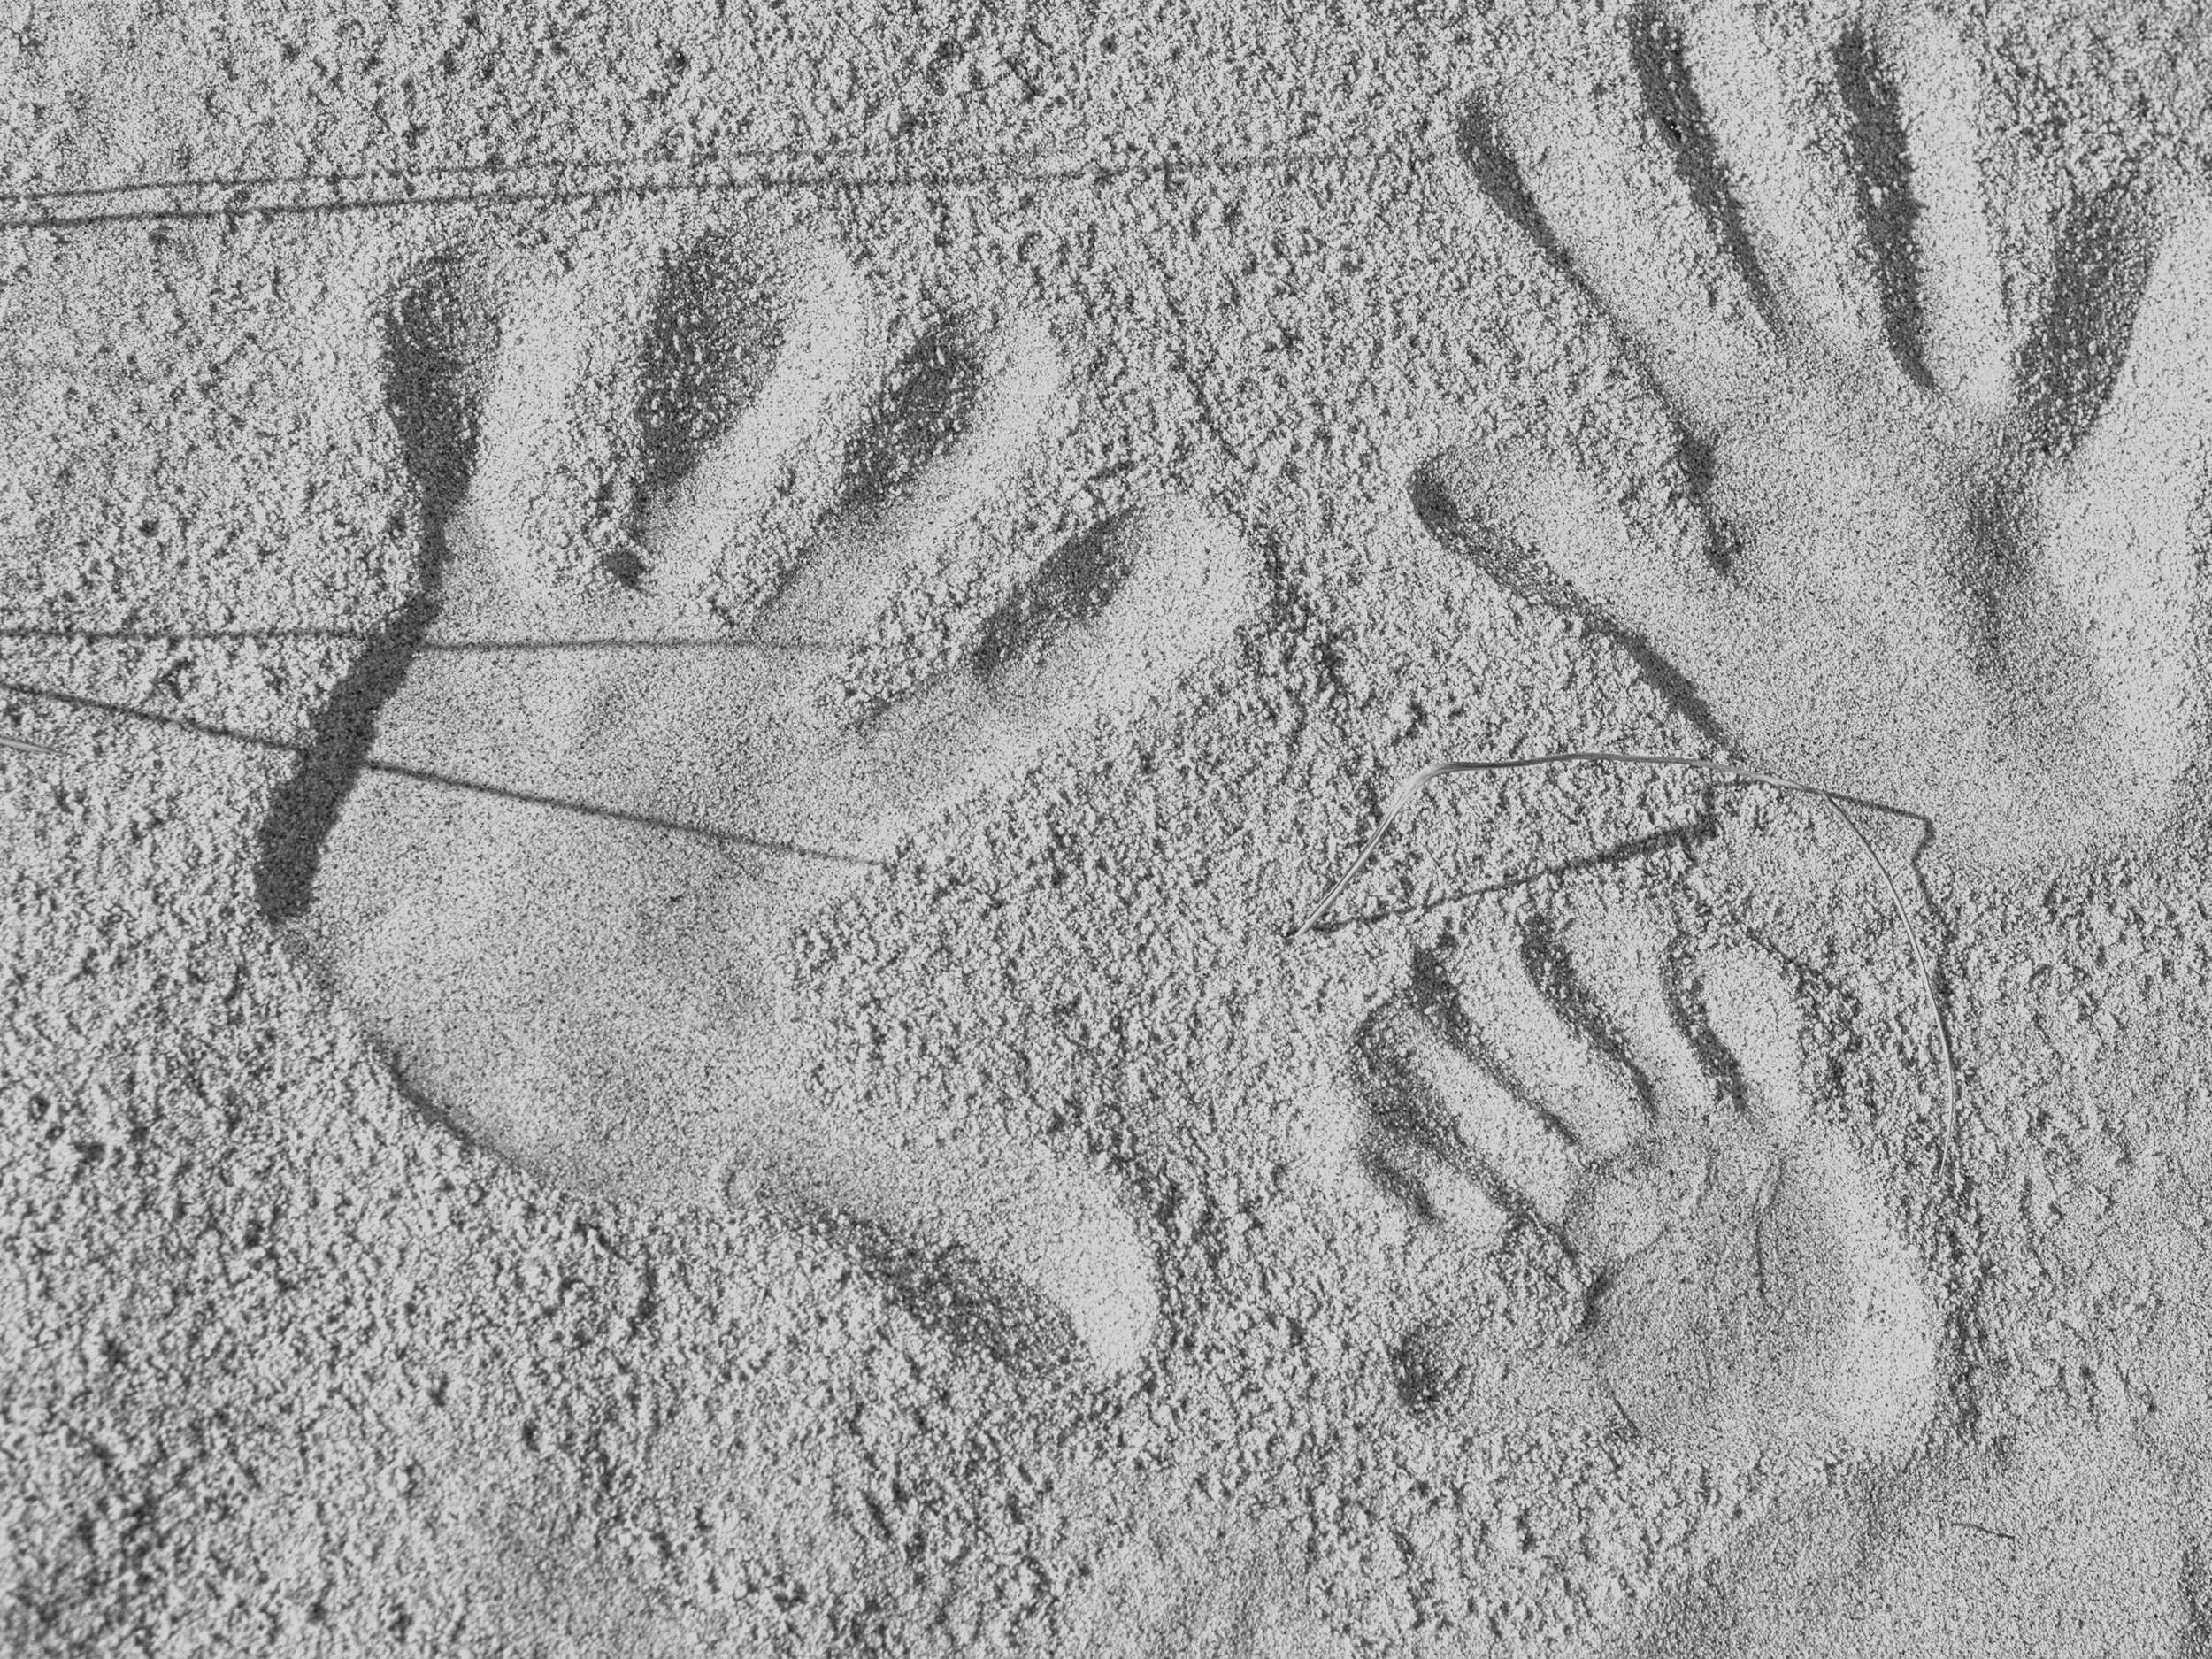 Handprints in the sand